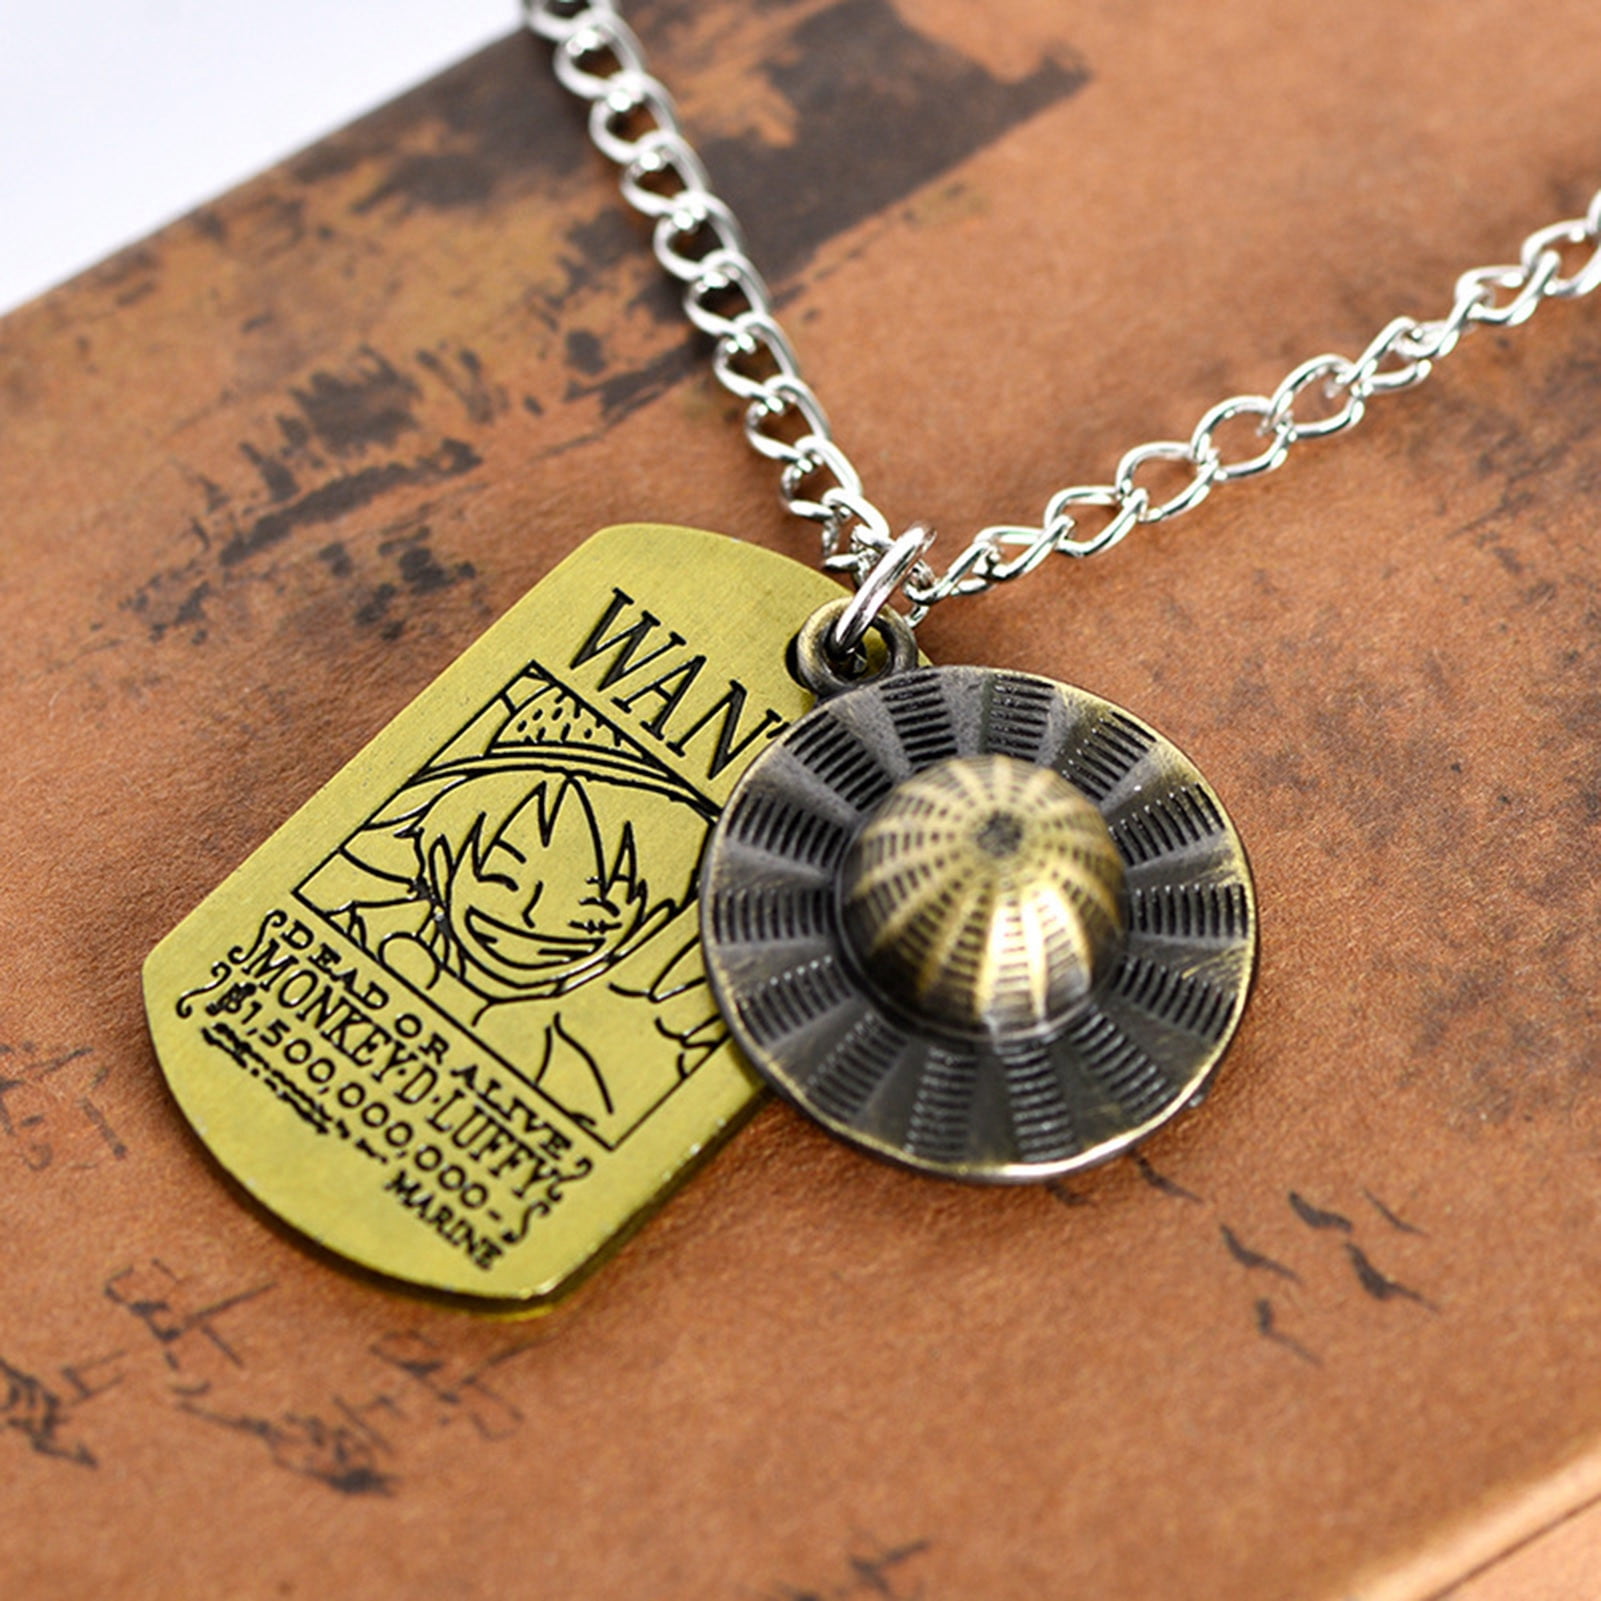 40 Anime Necklaces ideas | anime necklace, anime store, necklace